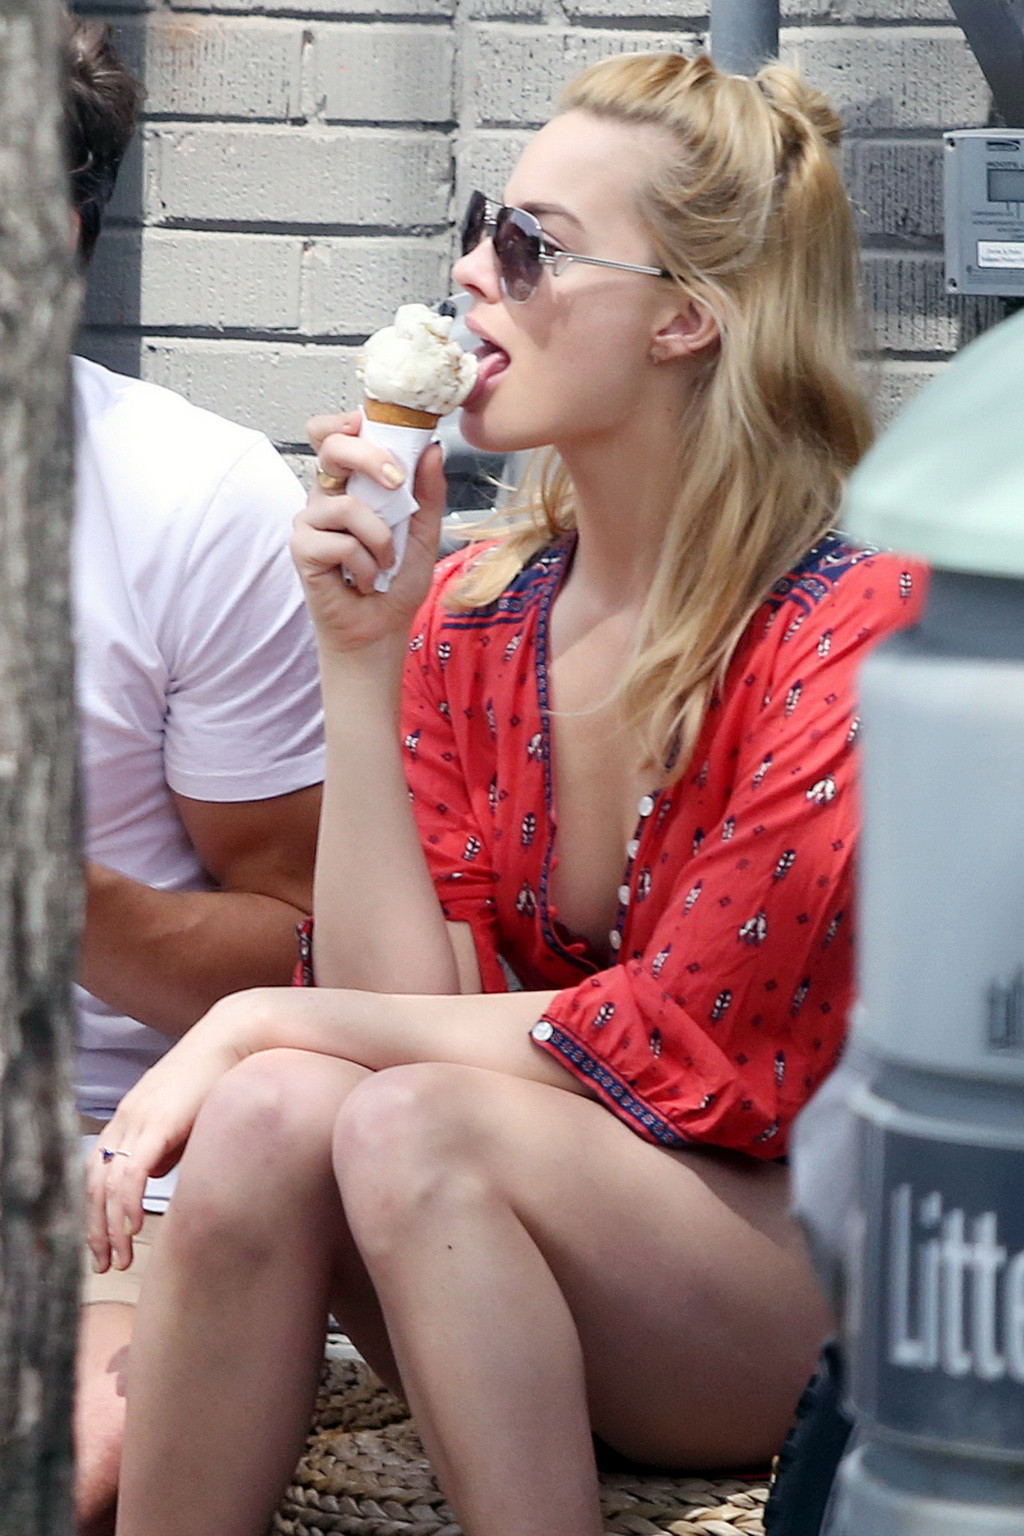 Margot Robbie Cleavy Licking An Ice Cream And Getting Ass Groped Porn